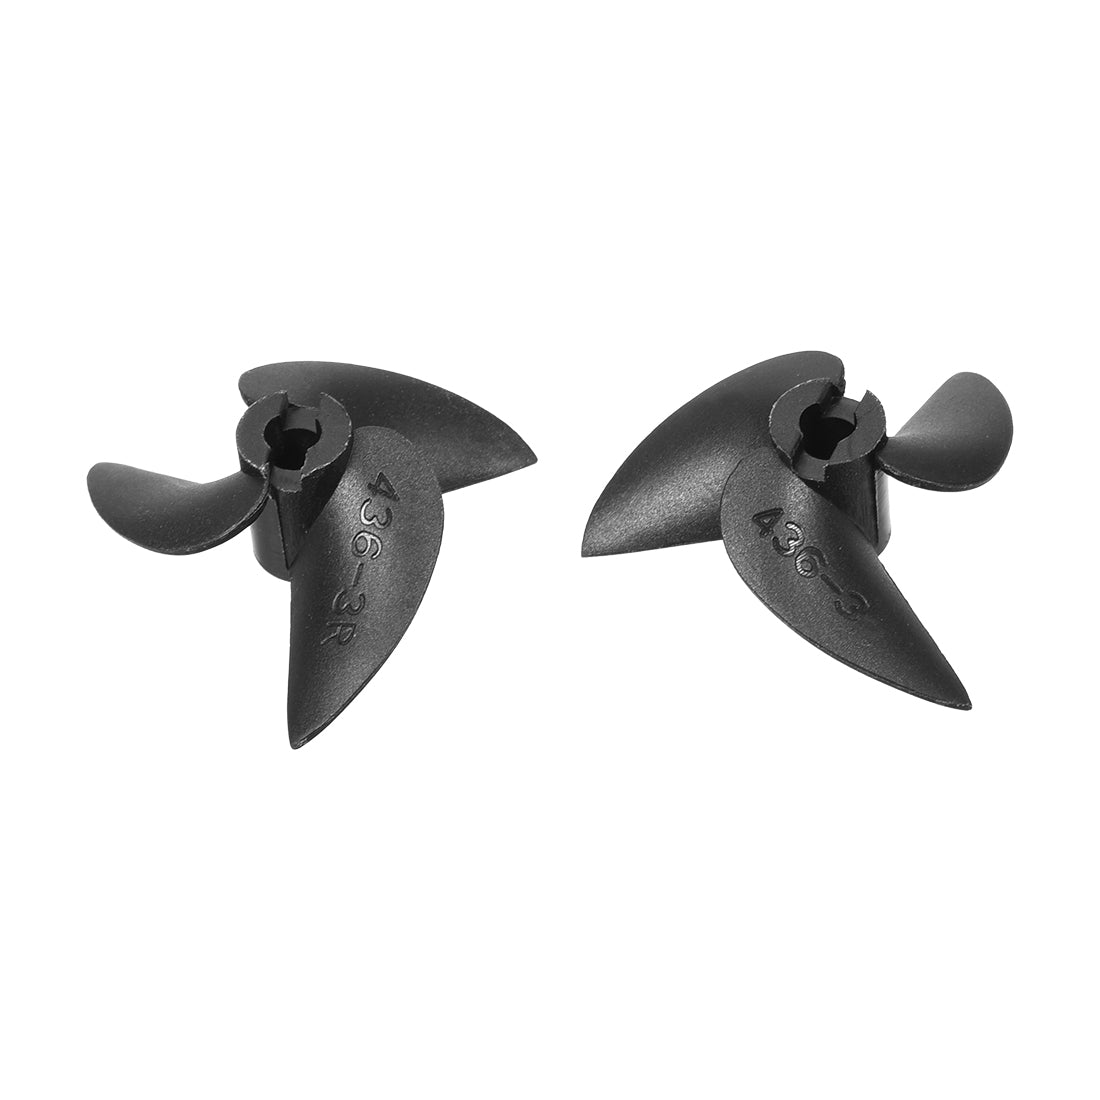 uxcell Uxcell RC Boat CCW/CW Propeller 4mm Shaft 3 Vanes 36mm 1.4 P Fan Shape Pastic Black Rotating Propeller Props for RC Boat Pair